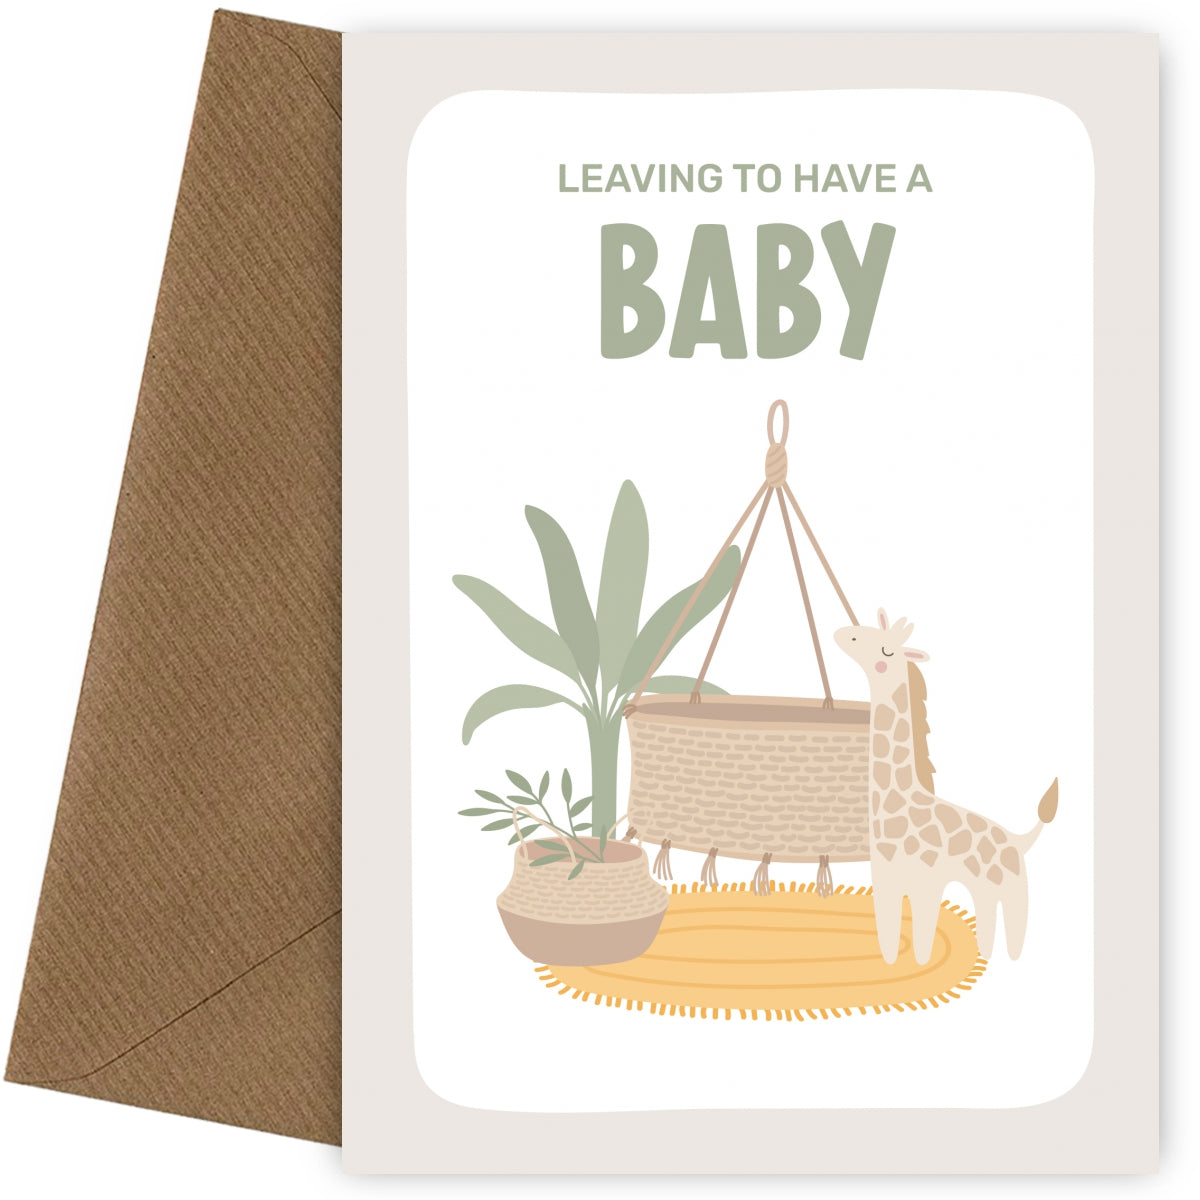 Cute Leaving to Have a Baby Card for Colleagues and Friends